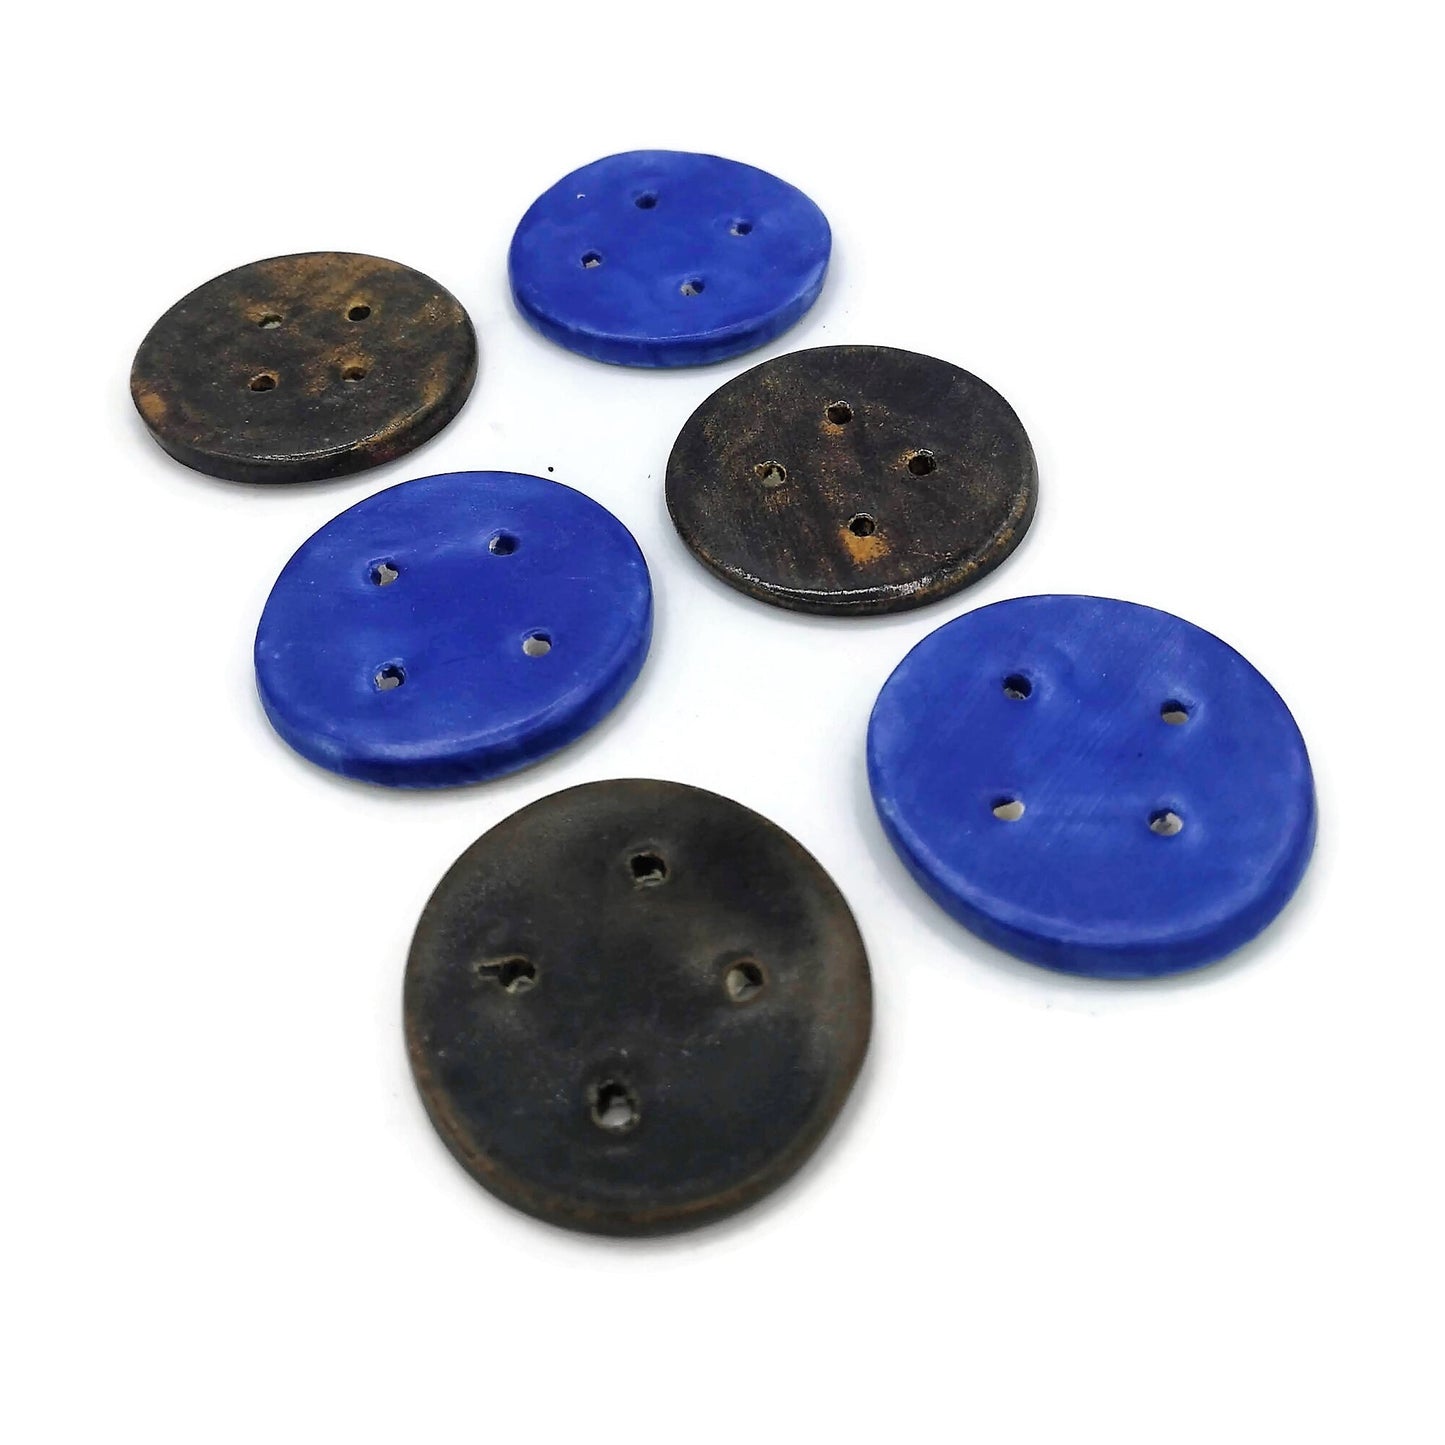 6Pc 55mm Extra Large Sewing Buttons For Crafts, Handmade Ceramic Round Novelty Buttons, Coat Button Lot For Clothes And Home Decor - Ceramica Ana Rafael